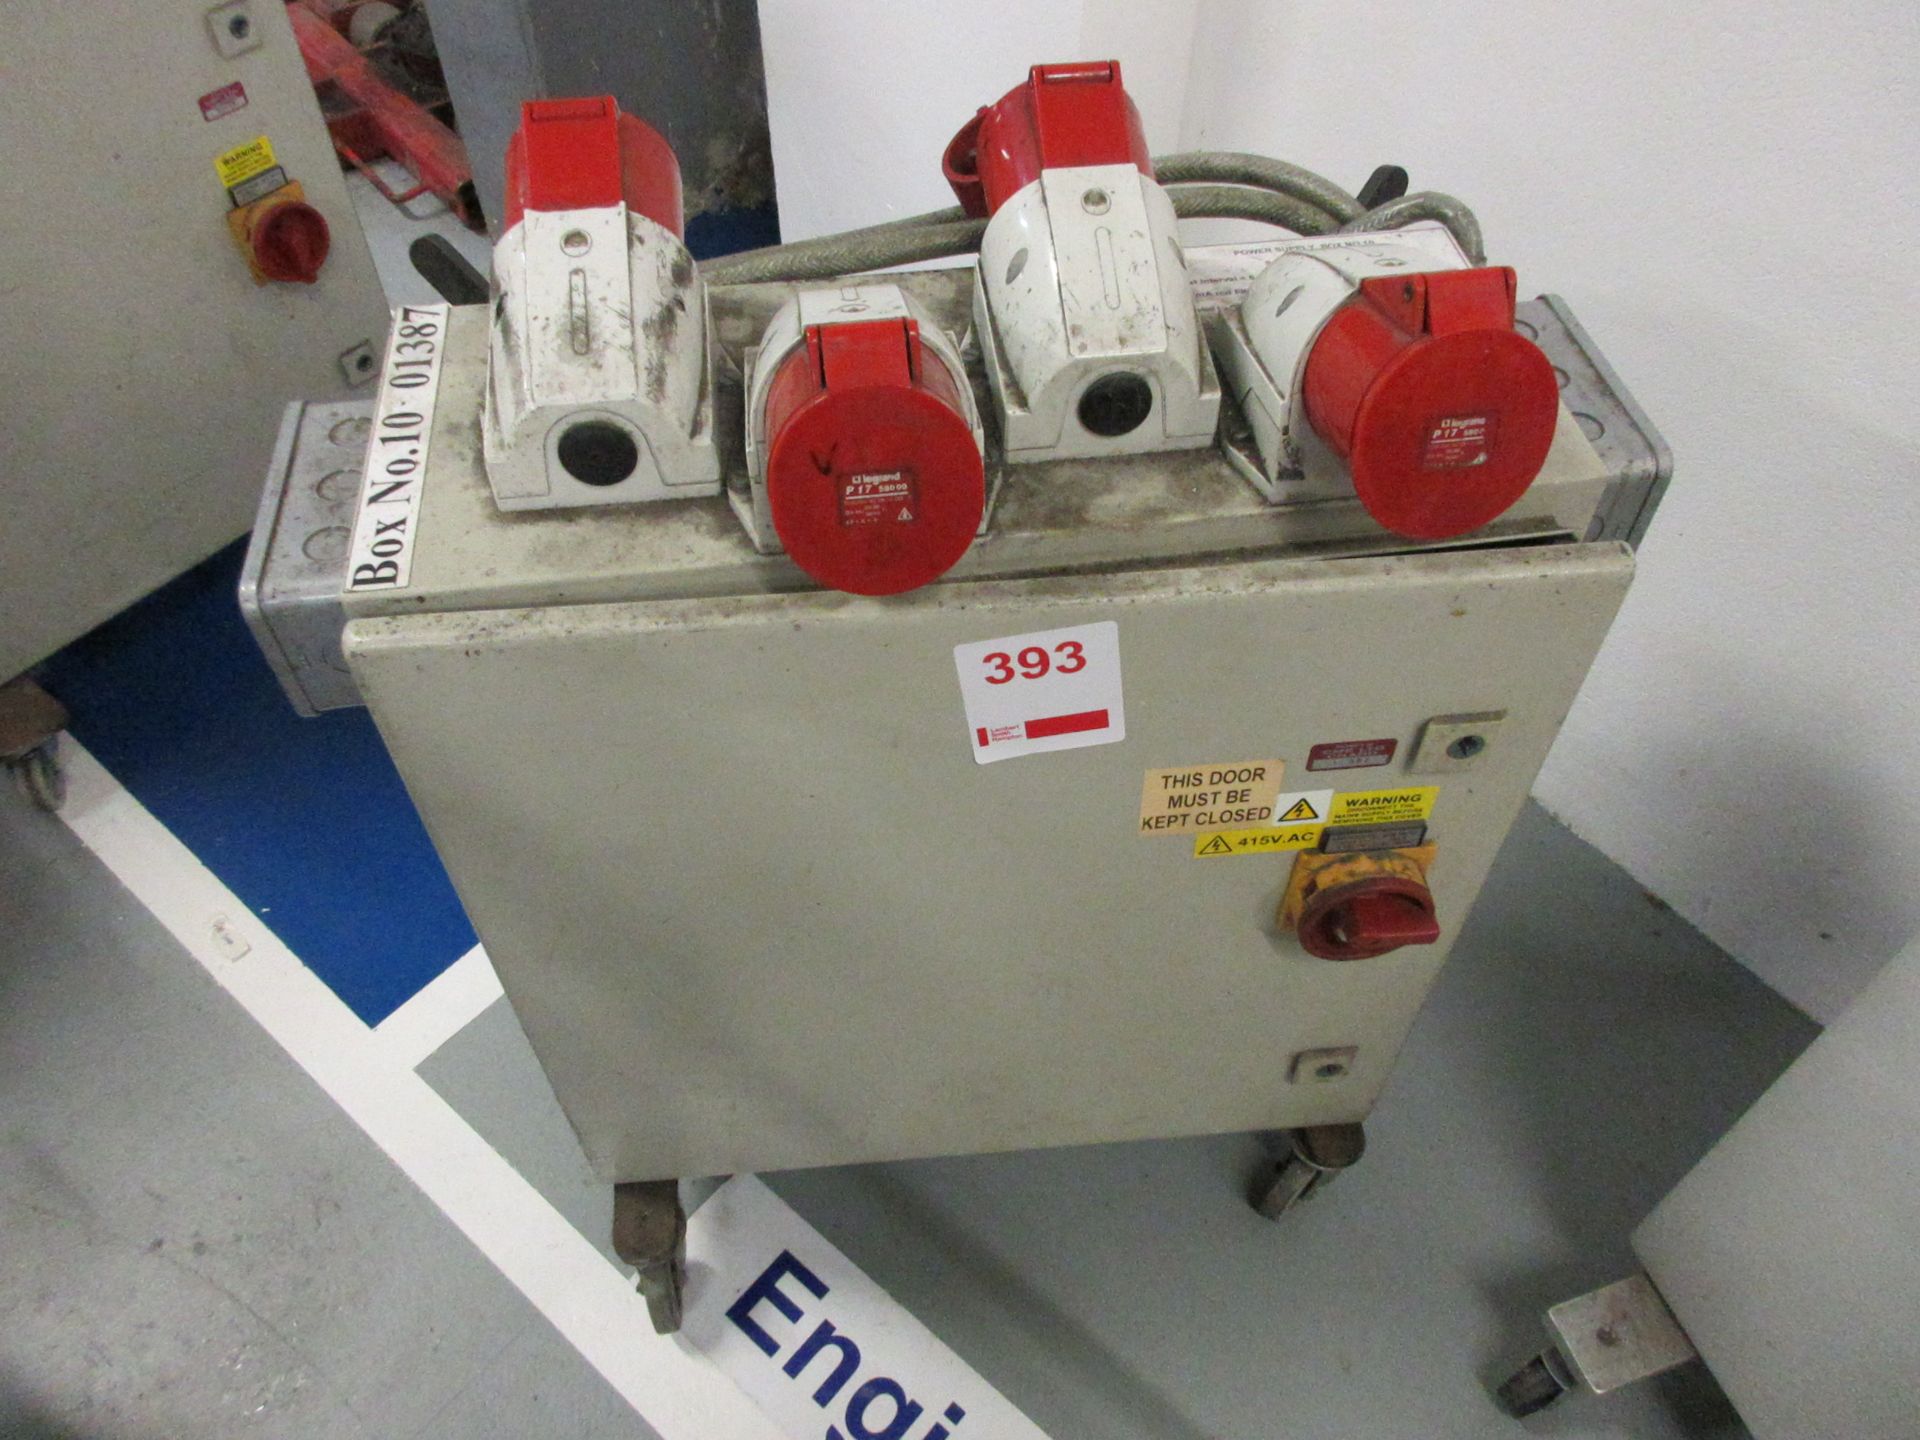 Mobile power supply unit (ref. box no. 10), 30 MA rcd fitted, serial no. 01387